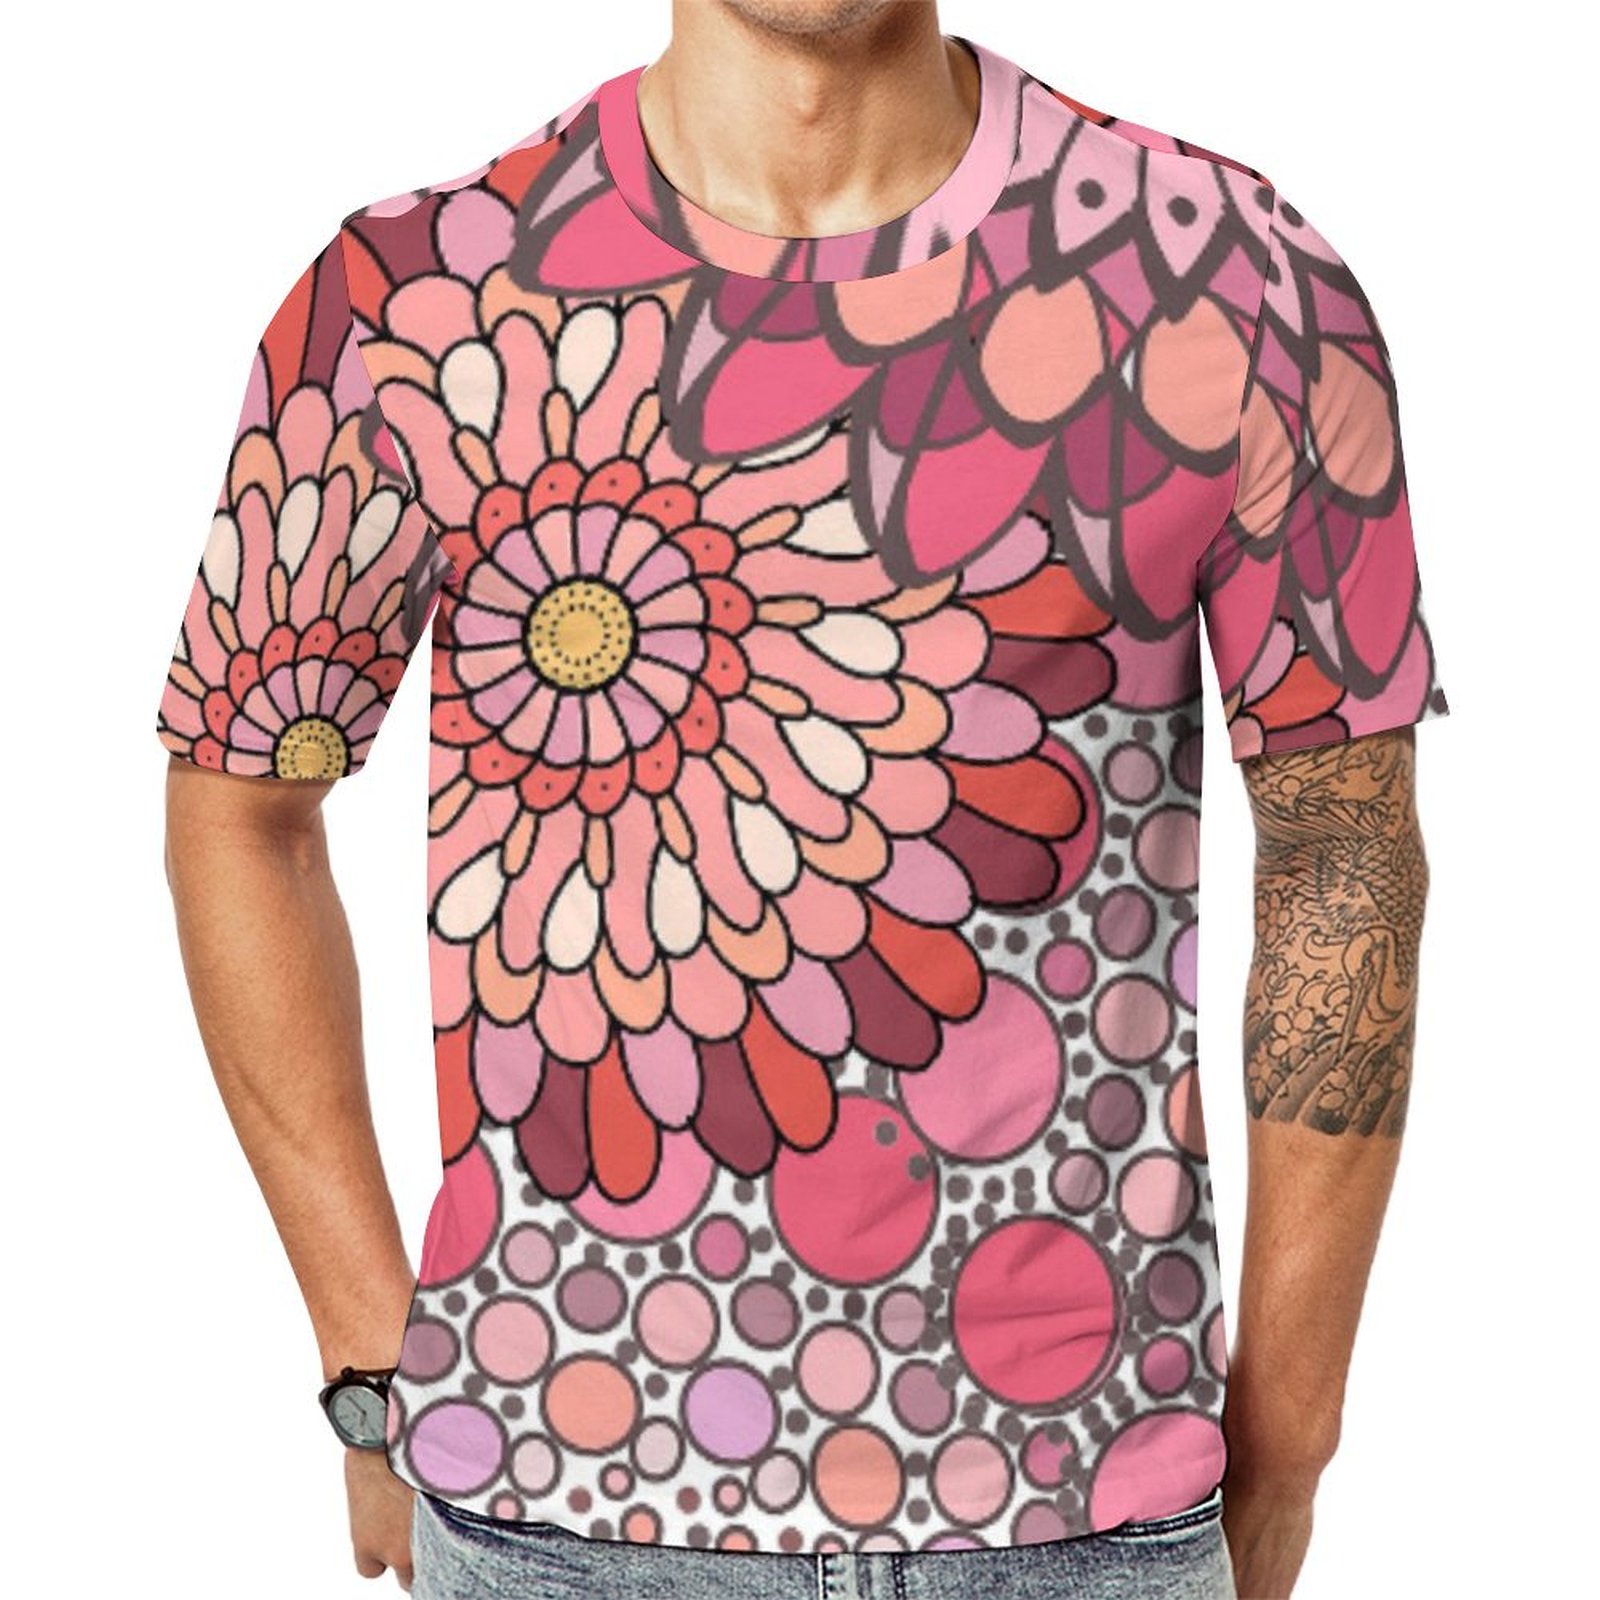 Girly Modern Pink White Geometric Floral Short Sleeve Print Unisex Tshirt Summer Casual Tees for Men and Women Coolcoshirts